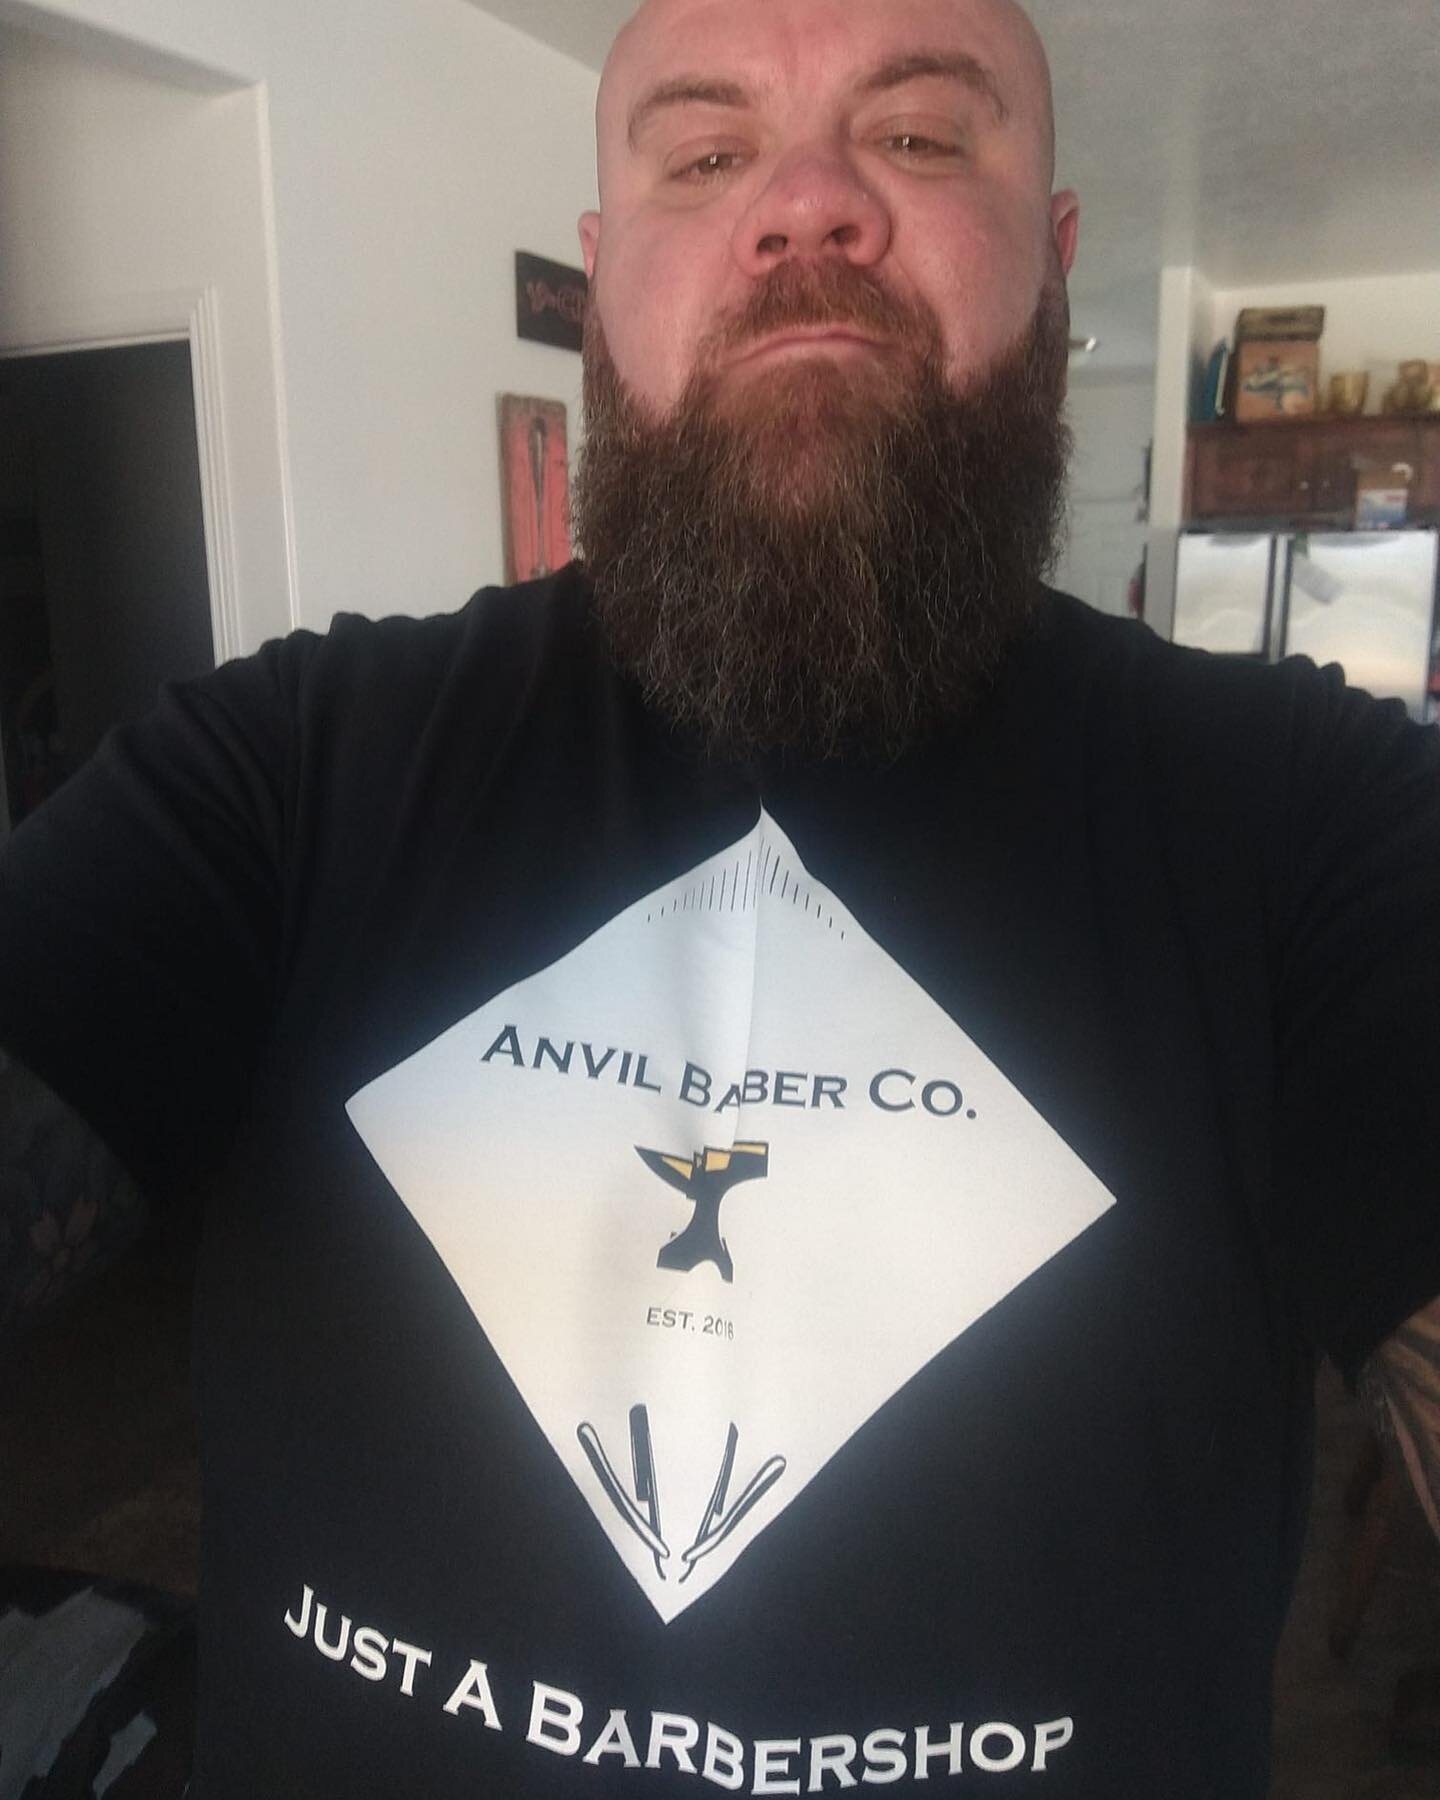 Thanks for supporting the shop Wes! So cool to have people repping! 
#AnvilBarberCo #justabarbershop #barbershop #barber #americanforkbarber #beard #bearded #beardtrim #americanfork #ut #utah #utahcounty #goodvibes